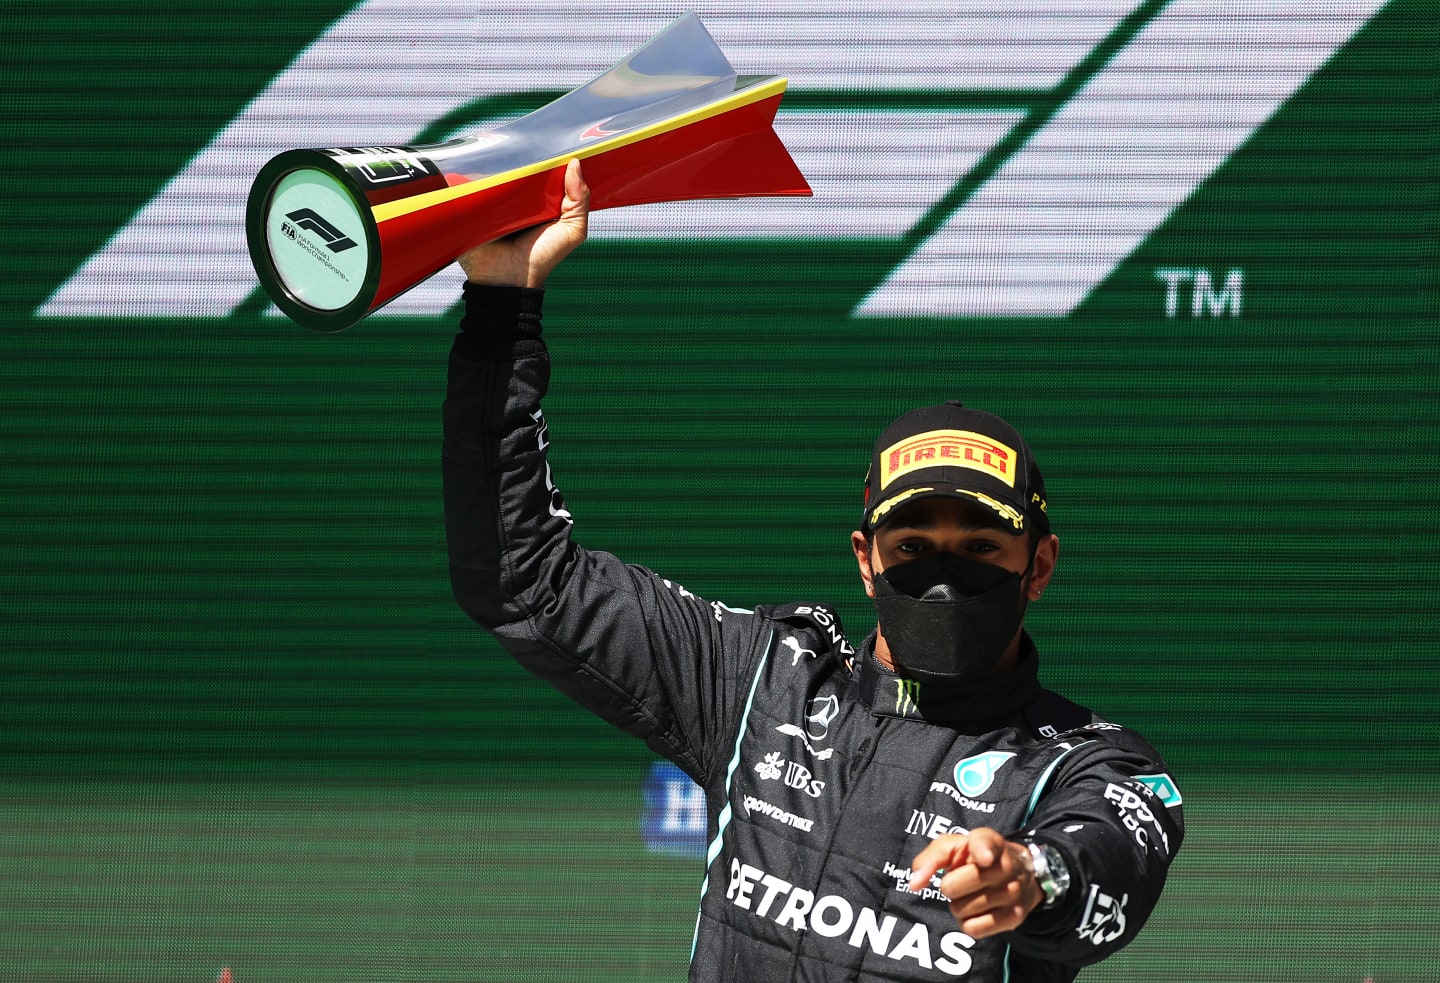 PORTIMAO, PORTUGAL - MAY 02: Race winner Lewis Hamilton of Great Britain and Mercedes GP celebrates